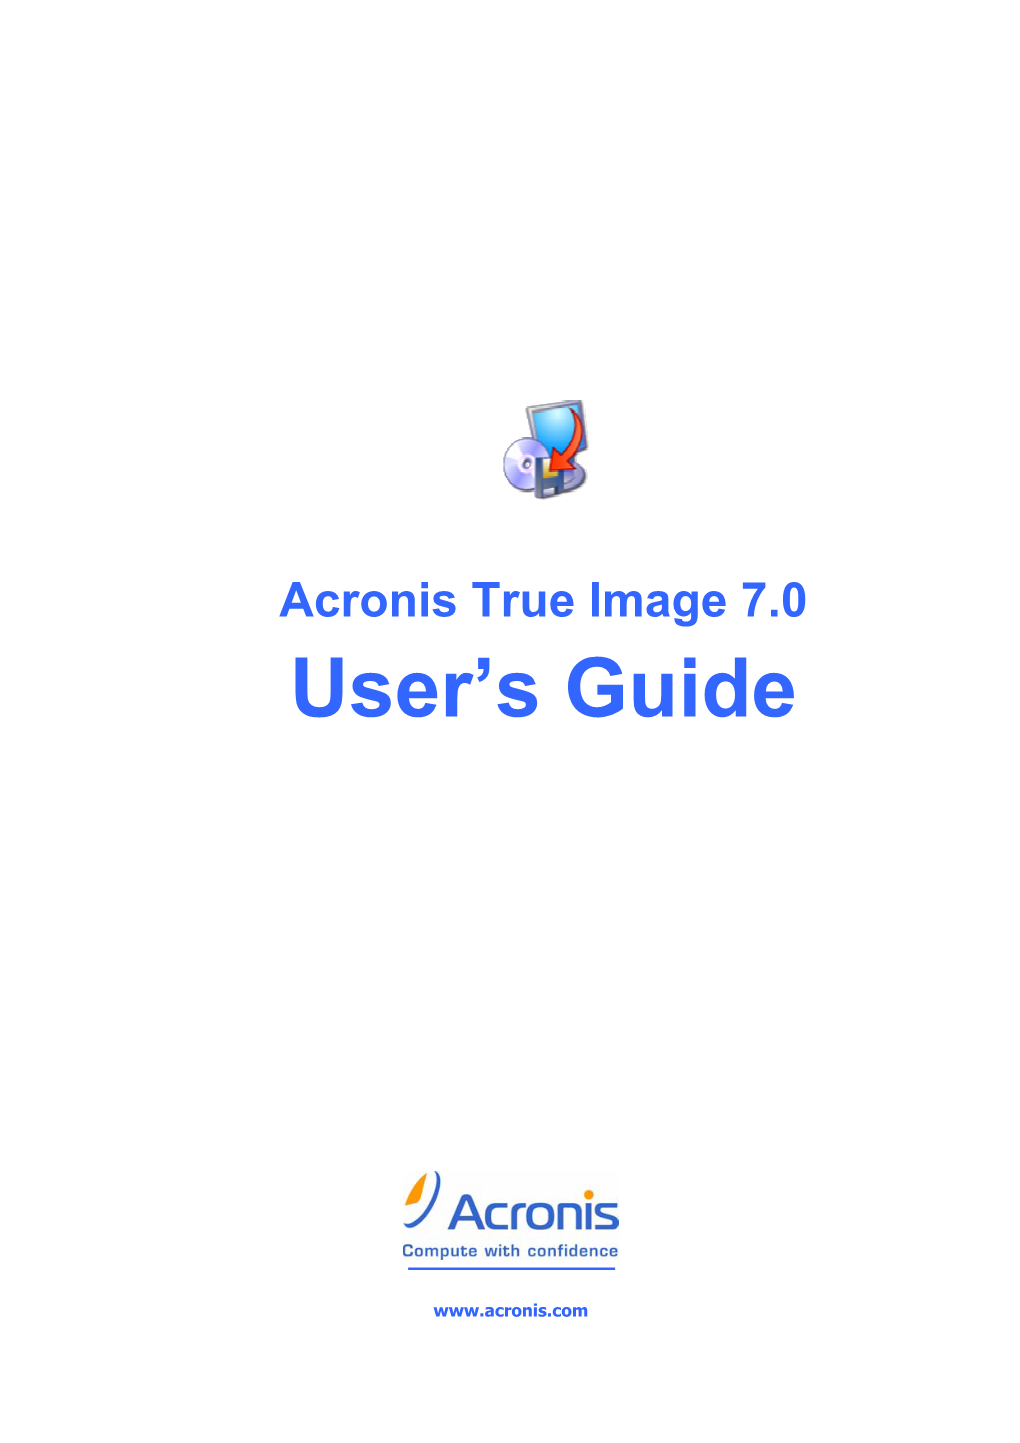 Acronis True Image User's Guide